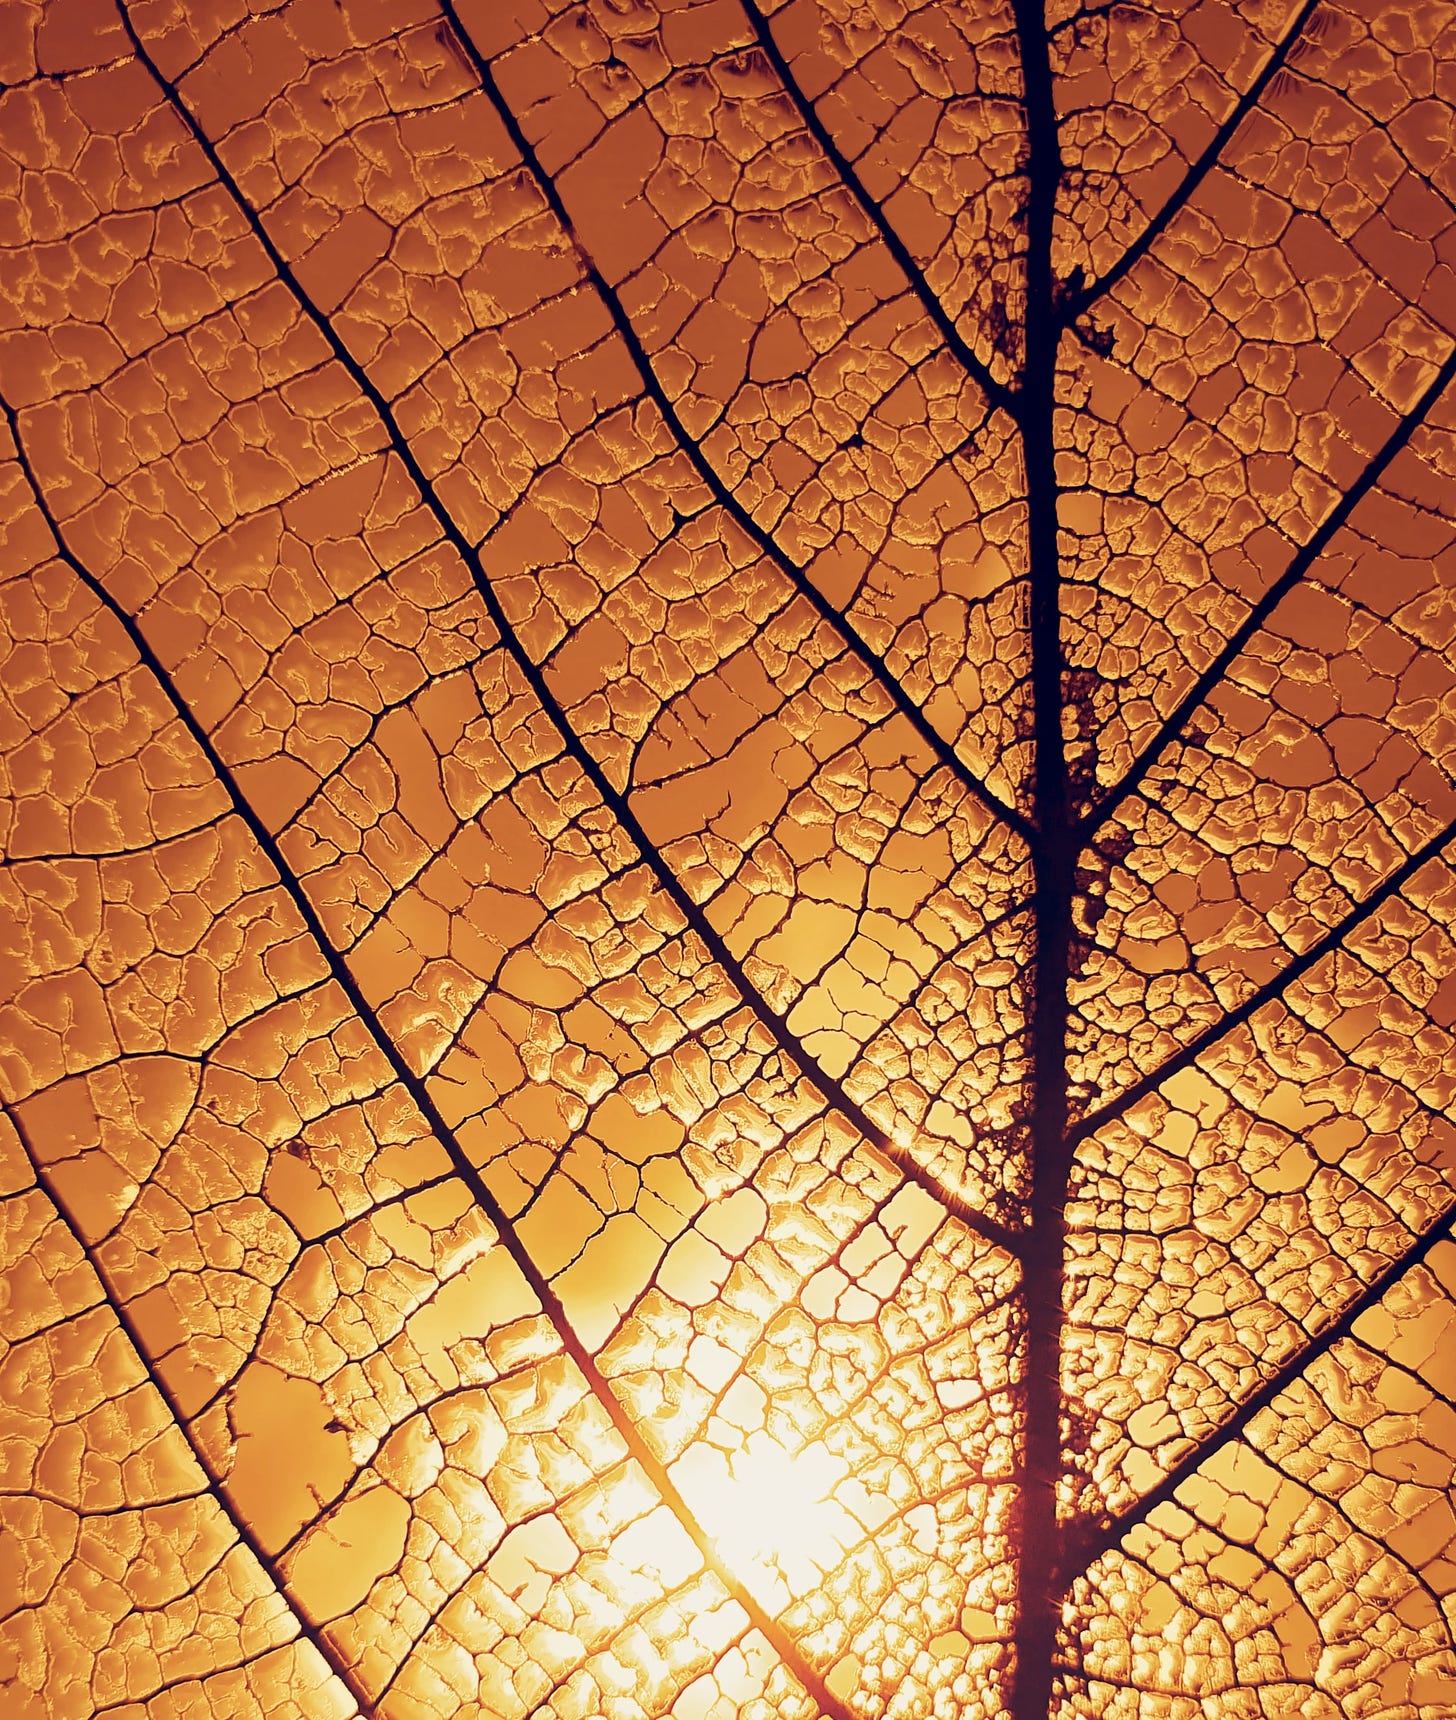 The structure of part of a leaf shows clearly as dark lines and cell walls, with the backlit leaf glowing orange.